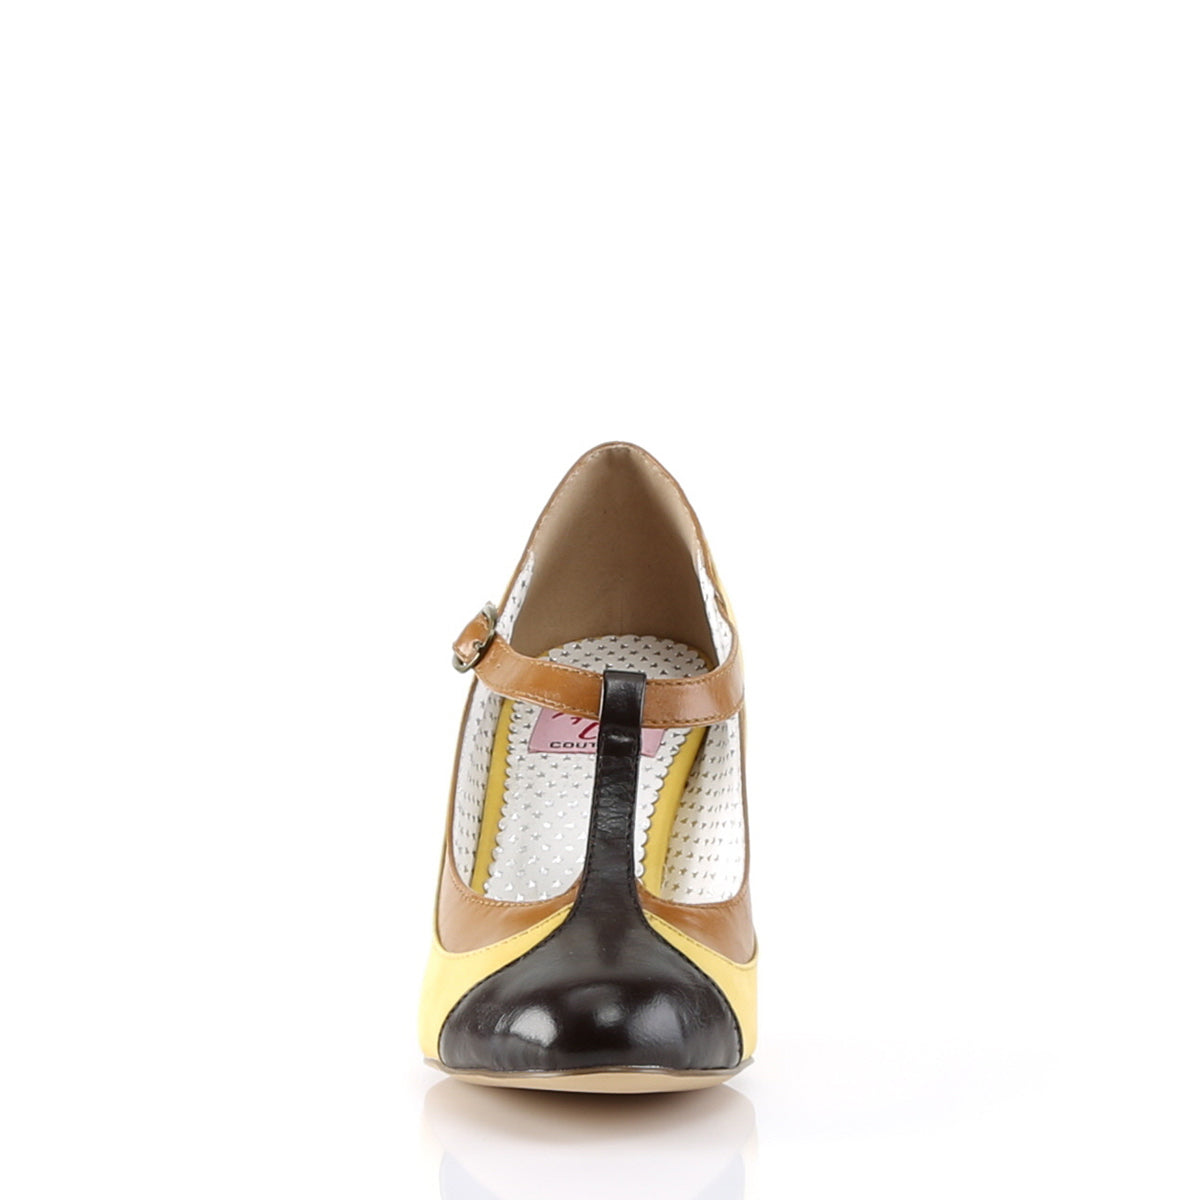 PEACH-03 Pin Up Couture Yellow Multi Faux Leather Single Soles [Retro Glamour Shoes]